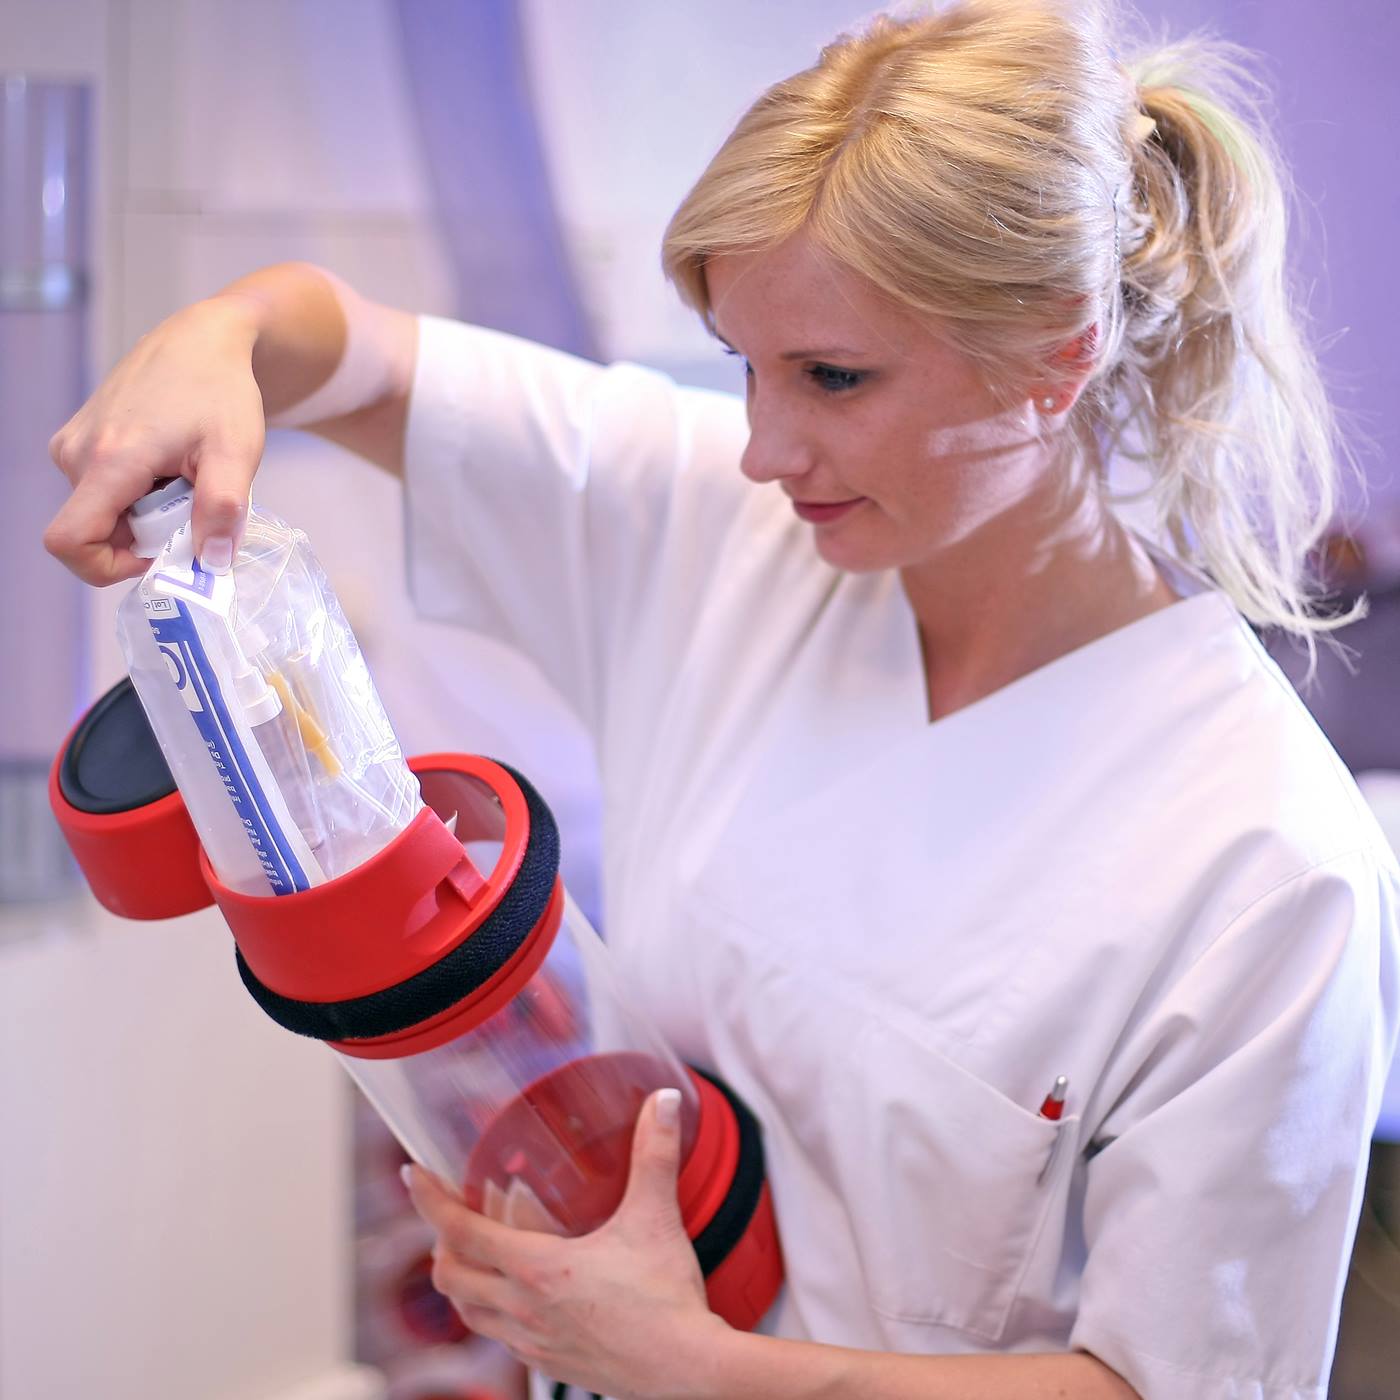 Medical staff fills carrier of pneumatic tube system